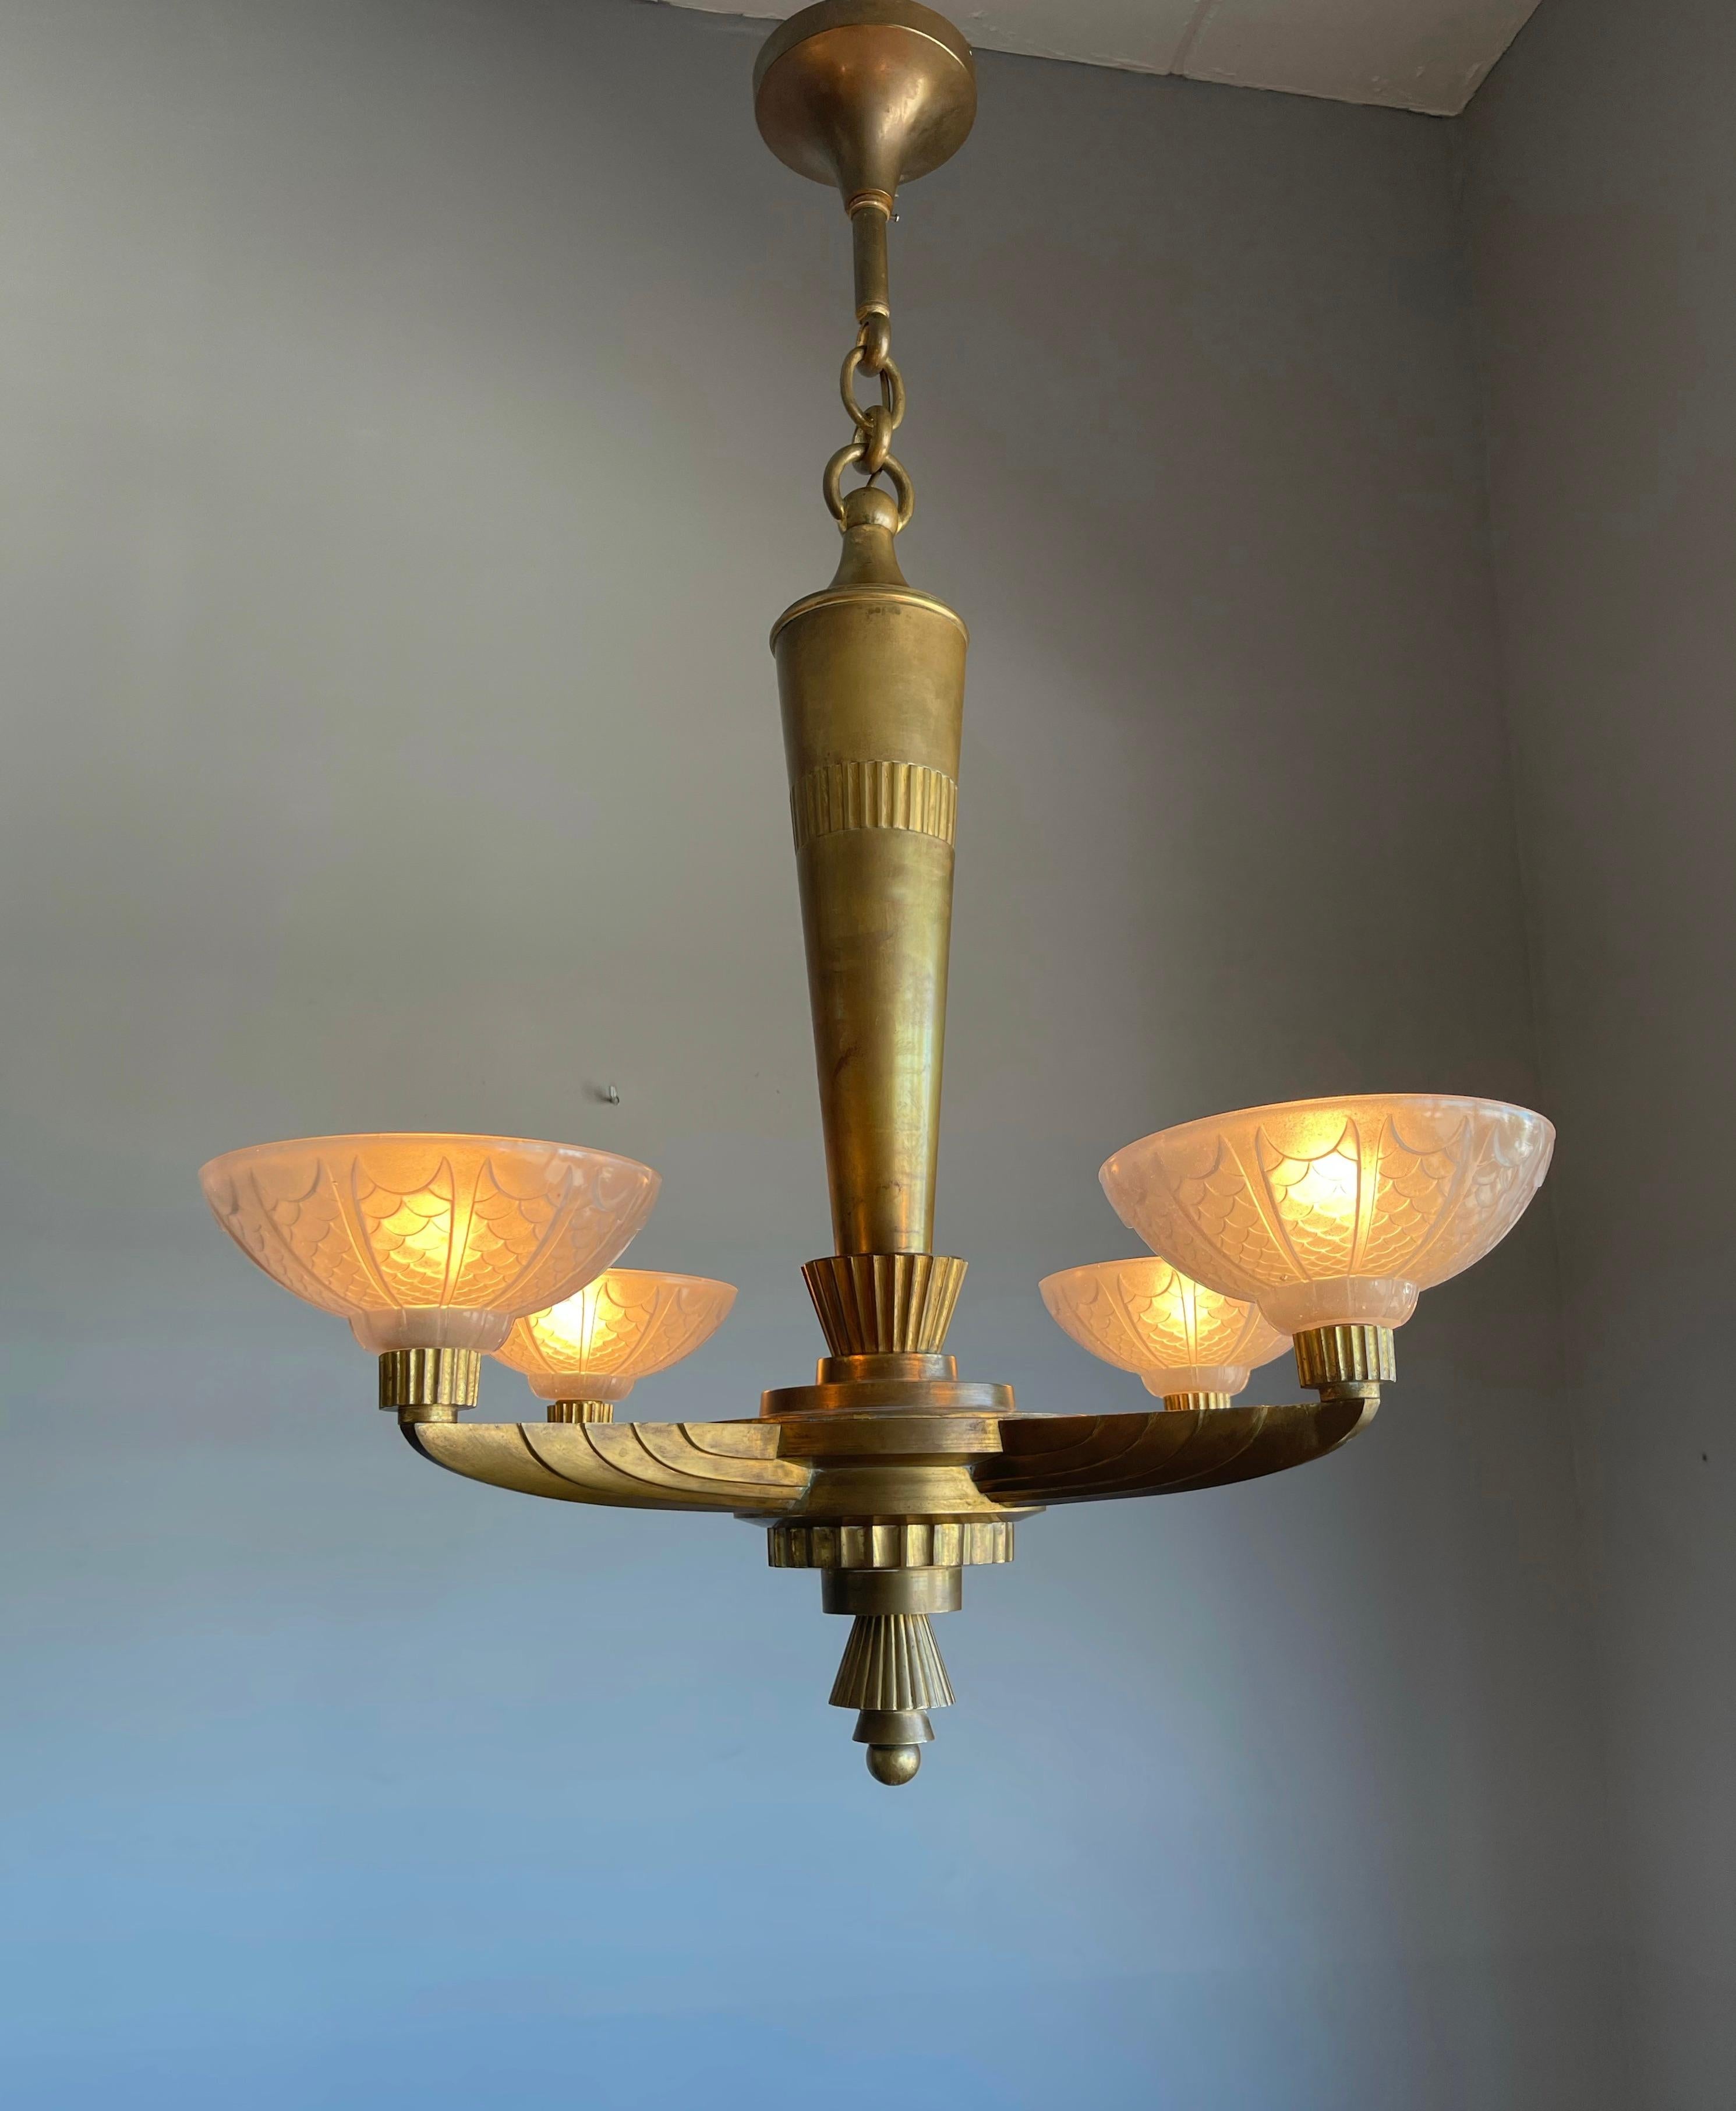 French Pure France Art Deco 1920s Bronze & Glass Pendant Chandelier by Antonin Petitot For Sale